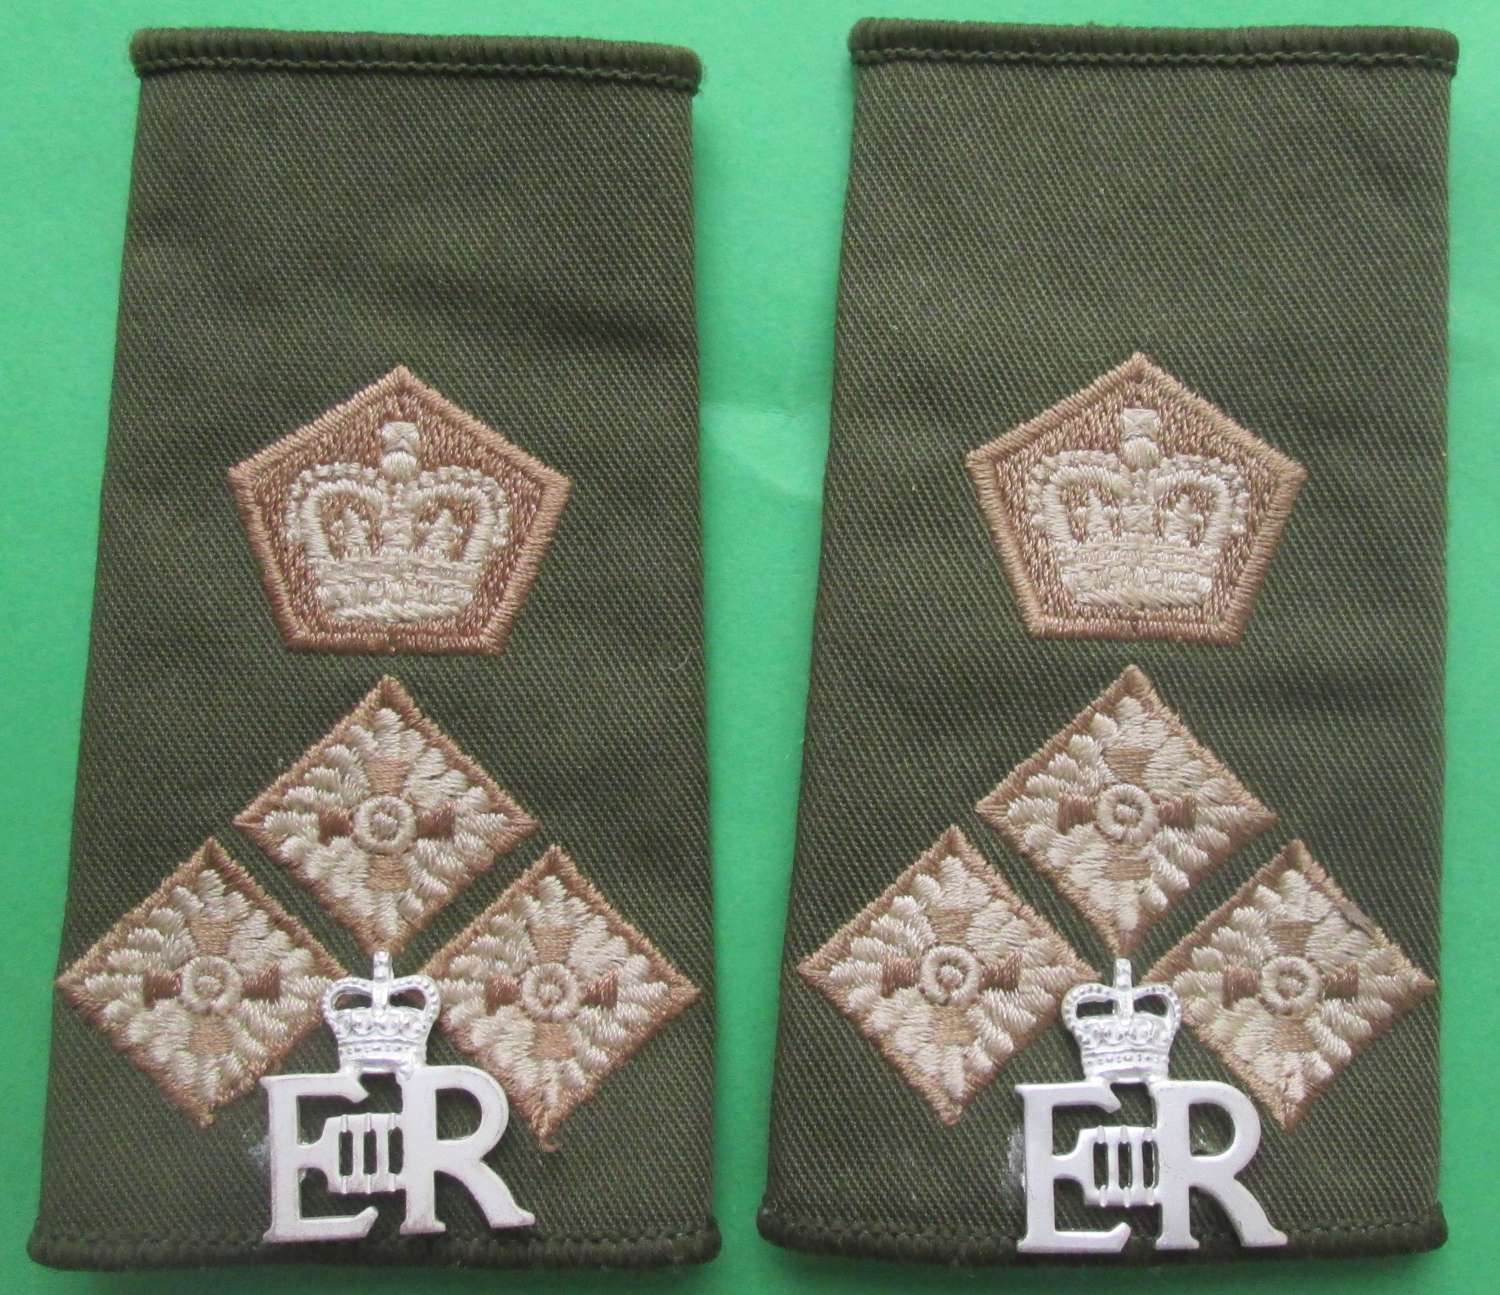 A PAIR OF 1970'S / 80'S AID DE CAMP TO THE QUEEN OFFICERS SLIDES